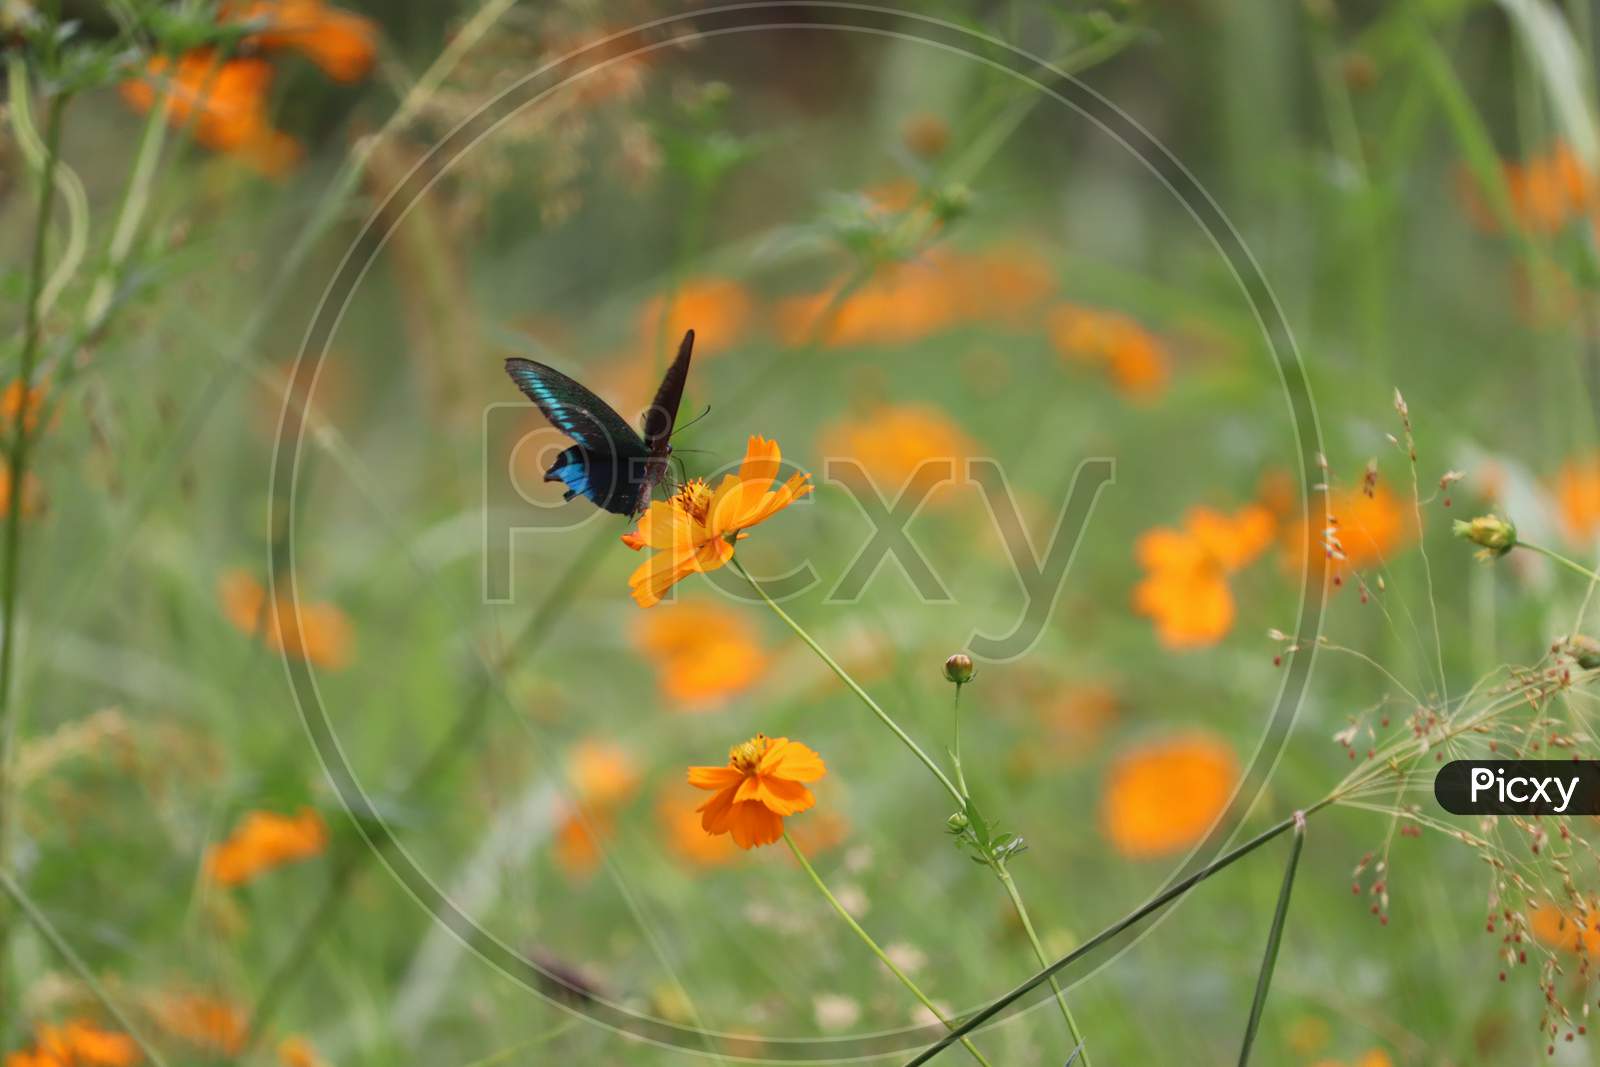 A butterfly hovers over a flower for nectar in Poonch